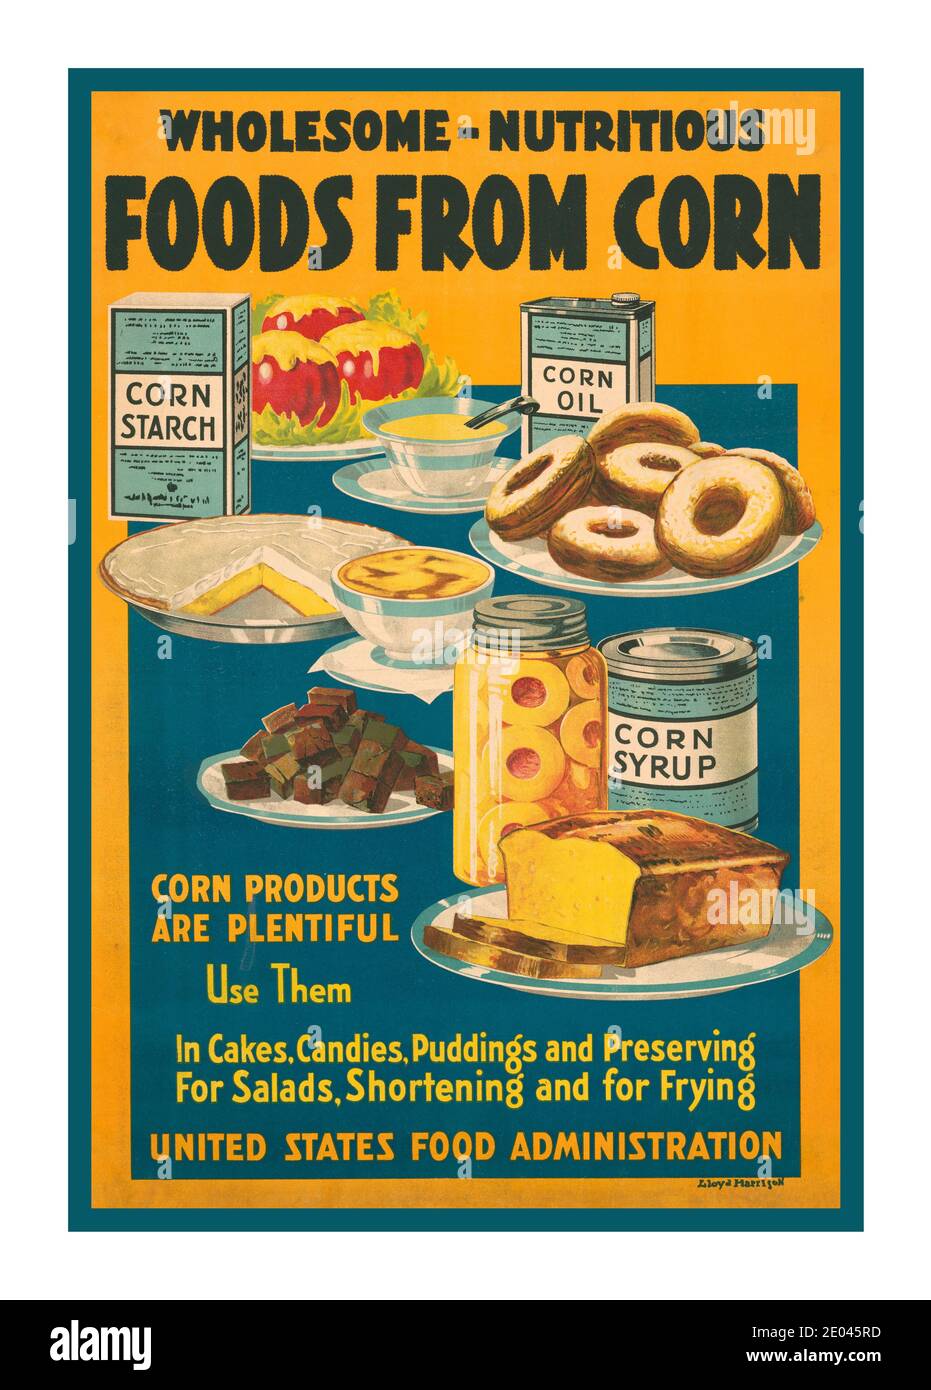 FOODS FROM CORN Vintage WW1 Poster American Food Advisory Poster using corn “Wholesome - nutritious foods from corn” / Lloyd Harrison.Poster showing an assortment of foods and dishes, along with corn starch, corn oil, and corn syrup. Harrison, Lloyd, artist Baltimore : Harrison-Landauer Inc., [1918] United States Food Administration--1910-1920 -  World War, 1914-1918--Economic & industrial aspects--United States -  Food supply--1910-1920 Corn--1910-1920 Lithographs--Color--1910-1920. War posters--American--1910-1920.  Corn products are plentiful. Use them in cakes, candies, puddings Stock Photo